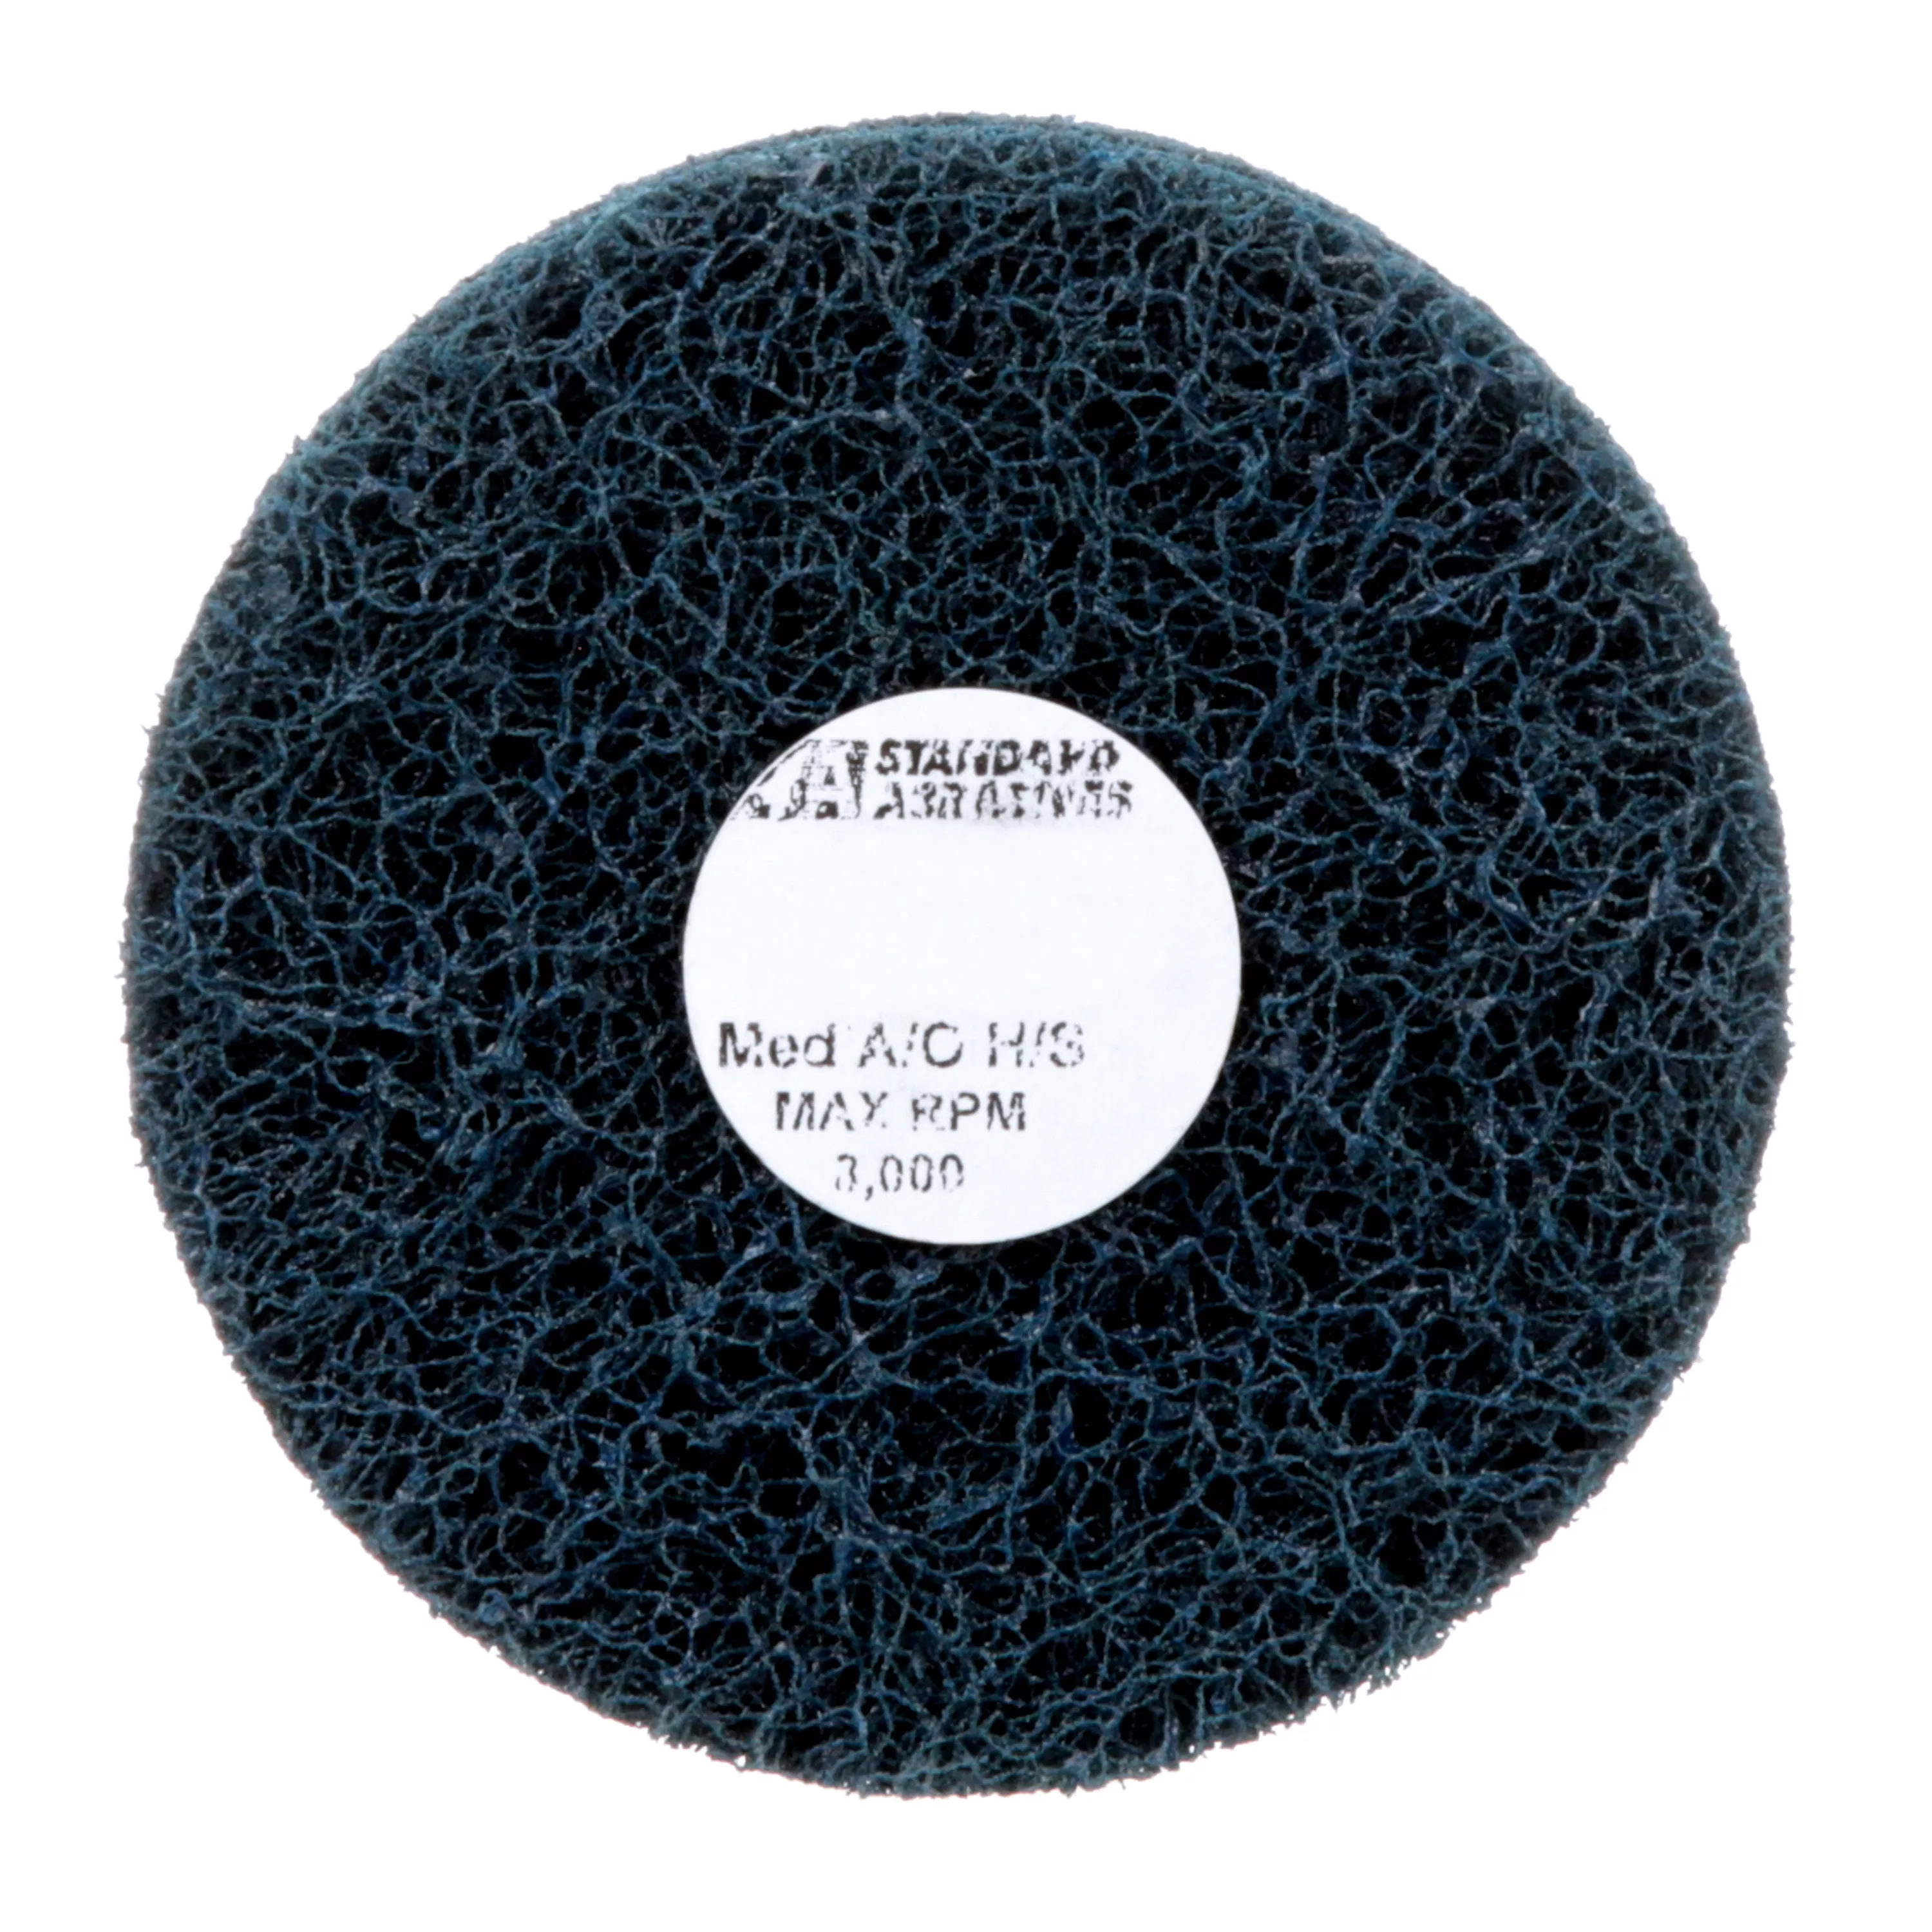 Standard Abrasives™ Buff and Blend HS Wheel 880475, 3 in x 2 Ply x 1/4
in A MED, 10/Carton, 100 ea/Case